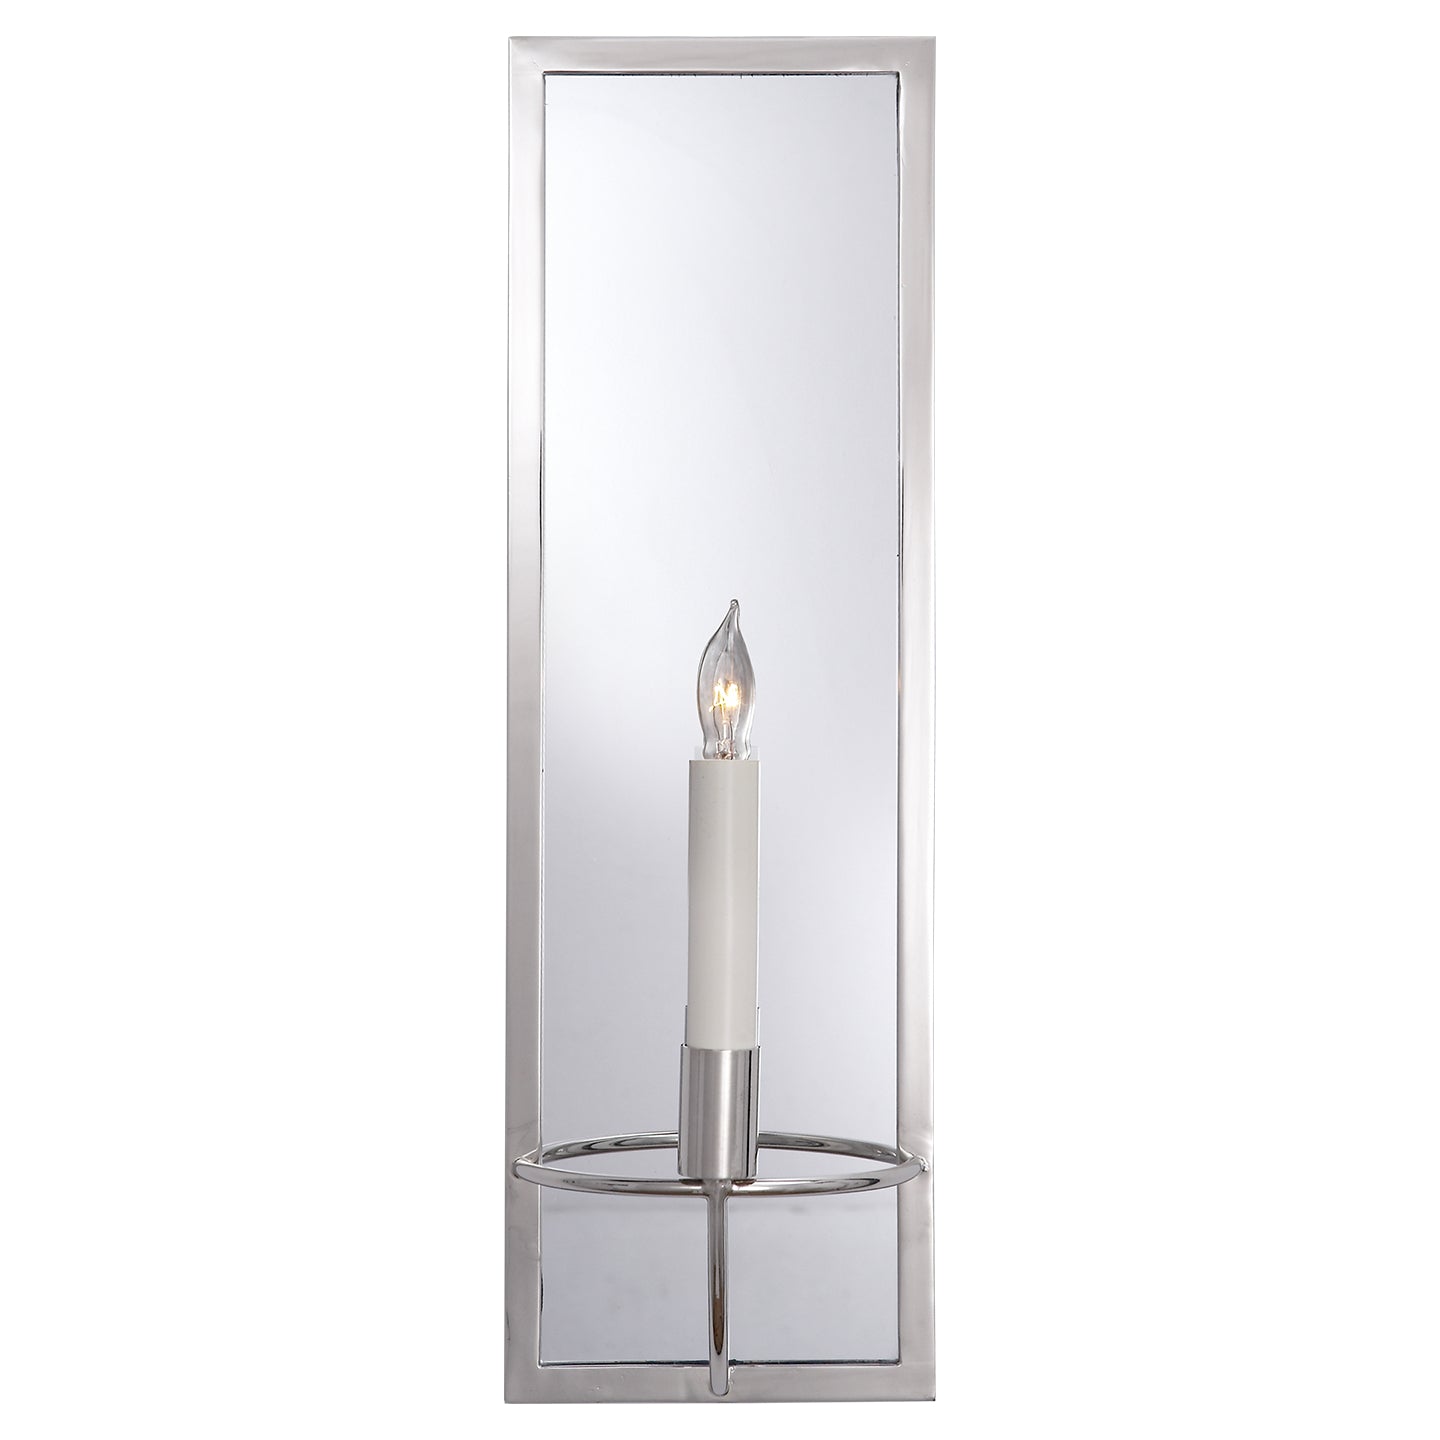 Visual Comfort Signature - NW 2115PN - One Light Wall Sconce - Regent - Polished Nickel